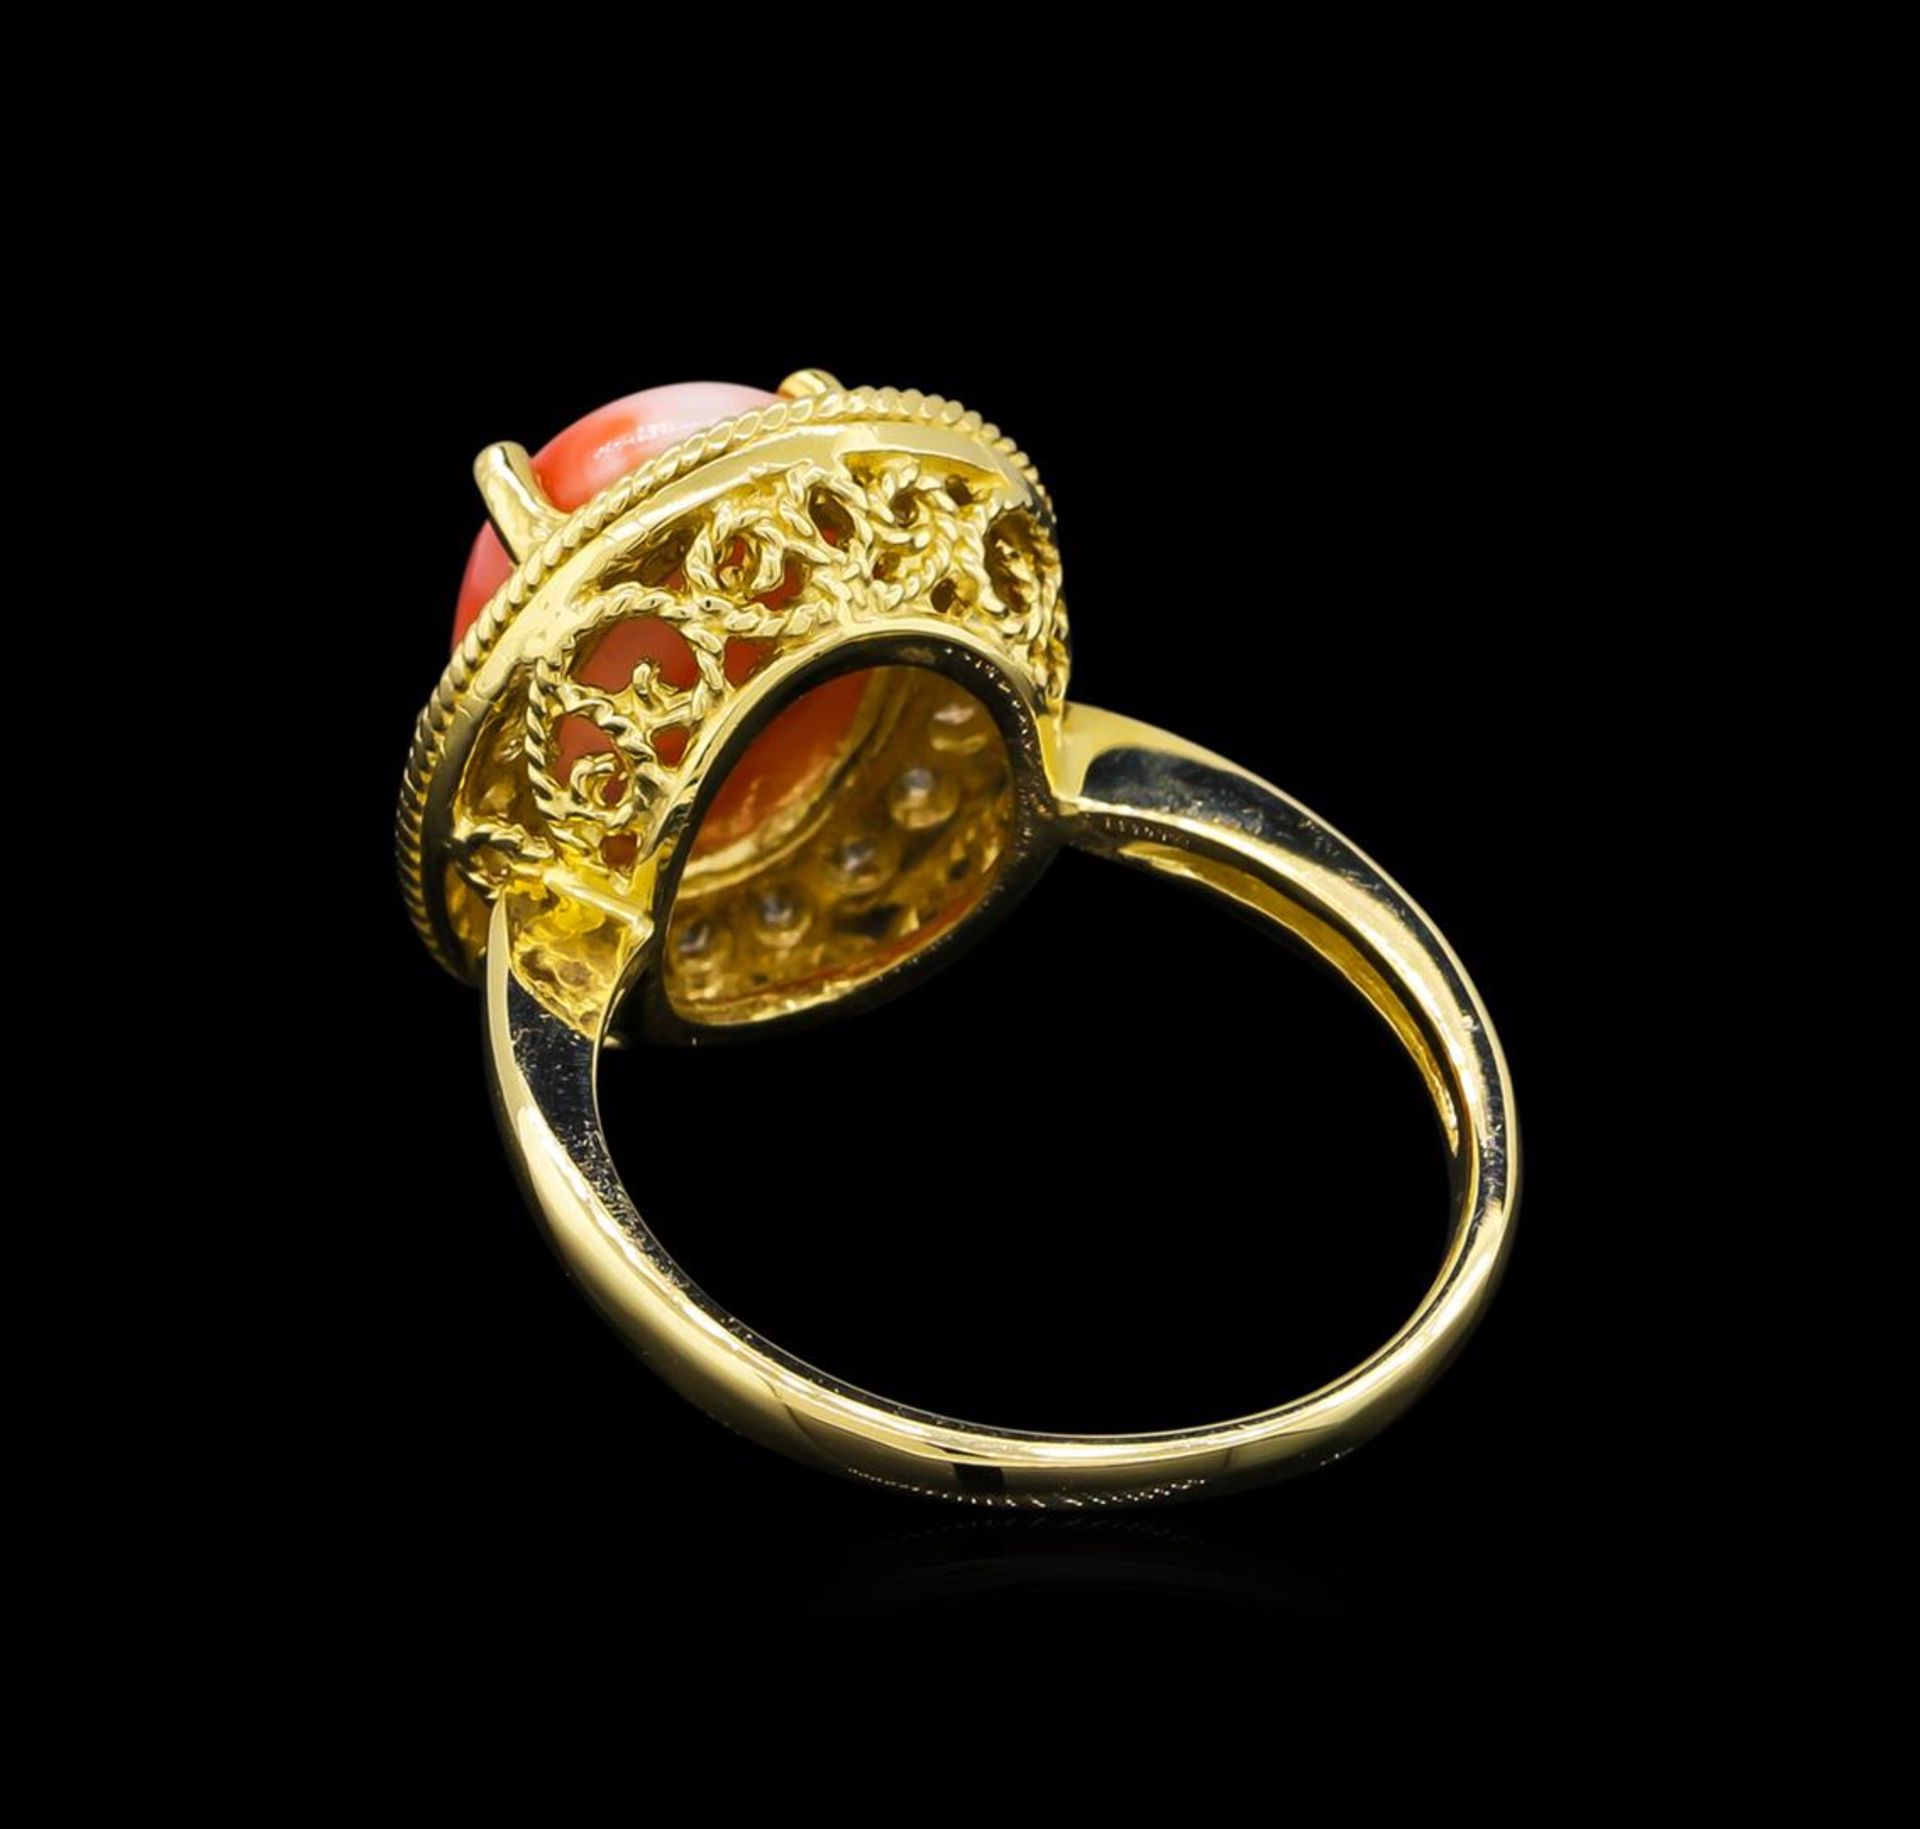 14KT Yellow Gold 3.16 ctw Coral and Diamond Ring - Image 3 of 5